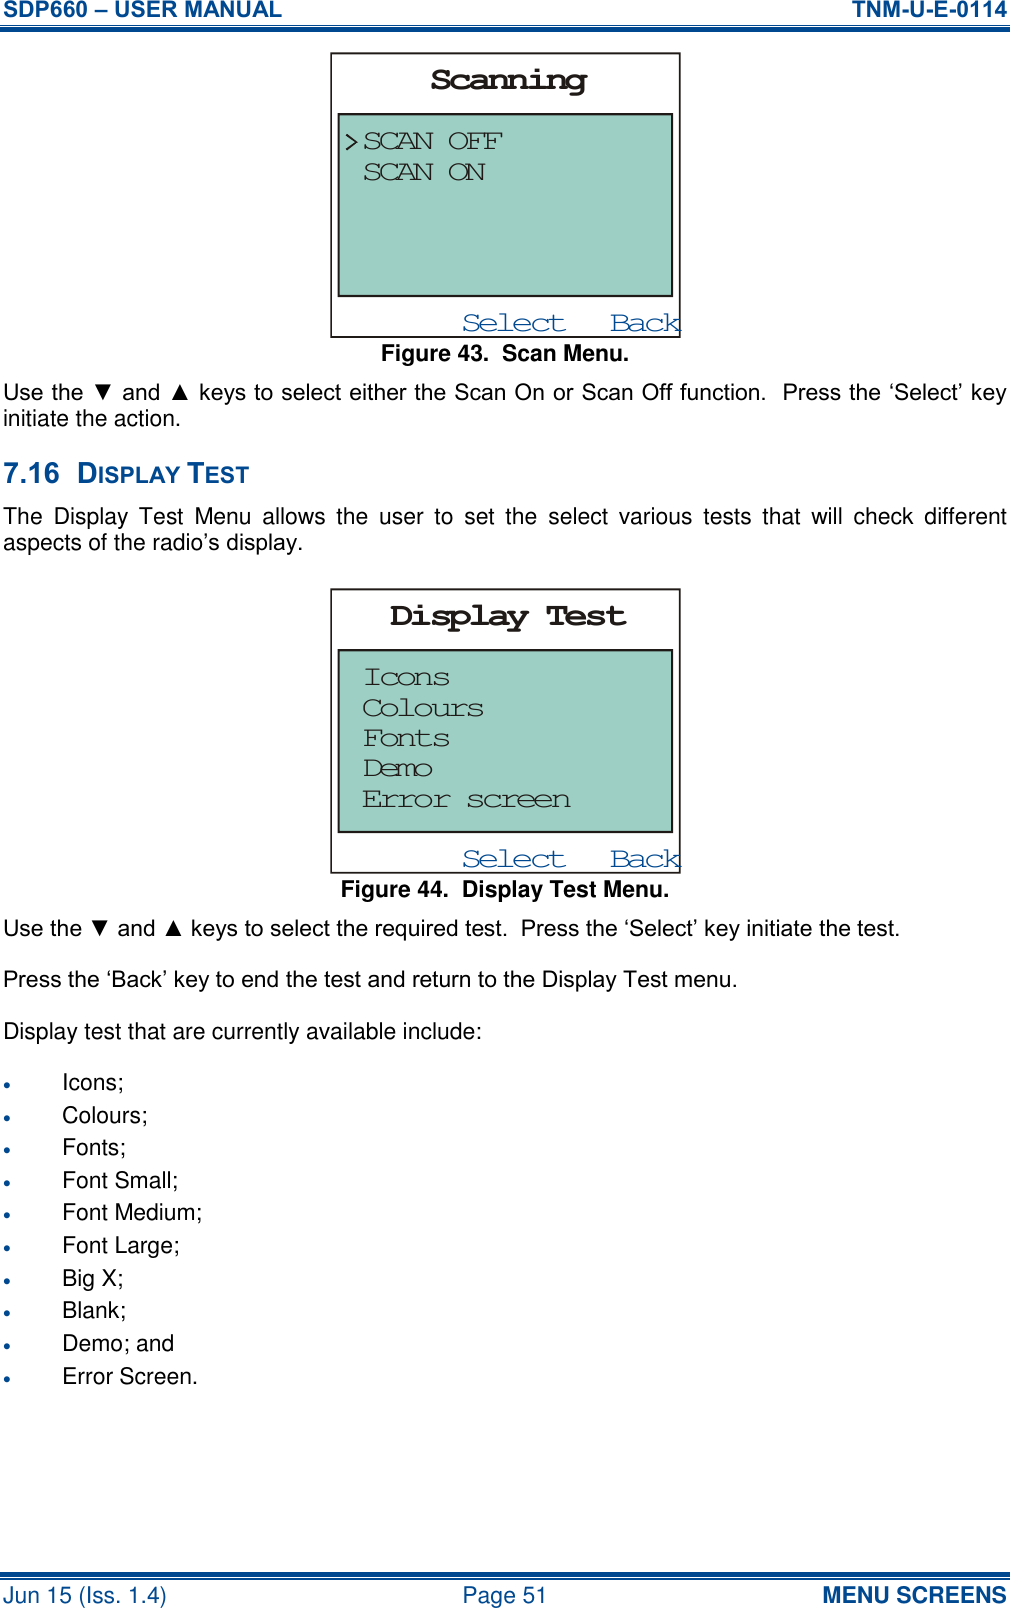 SDP660 – USER MANUAL  TNM-U-E-0114 Jun 15 (Iss. 1.4)  Page 51 MENU SCREENS Figure 43.  Scan Menu. Use the ▼ and ▲ keys to select either the Scan On or Scan Off function.  Press the ‘Select’ key initiate the action. 7.16 DISPLAY TEST The  Display  Test  Menu  allows  the  user  to  set  the  select  various  tests  that  will  check  different aspects of the radio’s display. Figure 44.  Display Test Menu. Use the ▼ and ▲ keys to select the required test.  Press the ‘Select’ key initiate the test. Press the ‘Back’ key to end the test and return to the Display Test menu. Display test that are currently available include:  Icons;  Colours;  Fonts;  Font Small;  Font Medium;  Font Large;  Big X;  Blank;  Demo; and  Error Screen.   BackSelectScanningSCAN OFFSCAN ONBackSelectDisplay TestIconsError screenDemoFontsColours